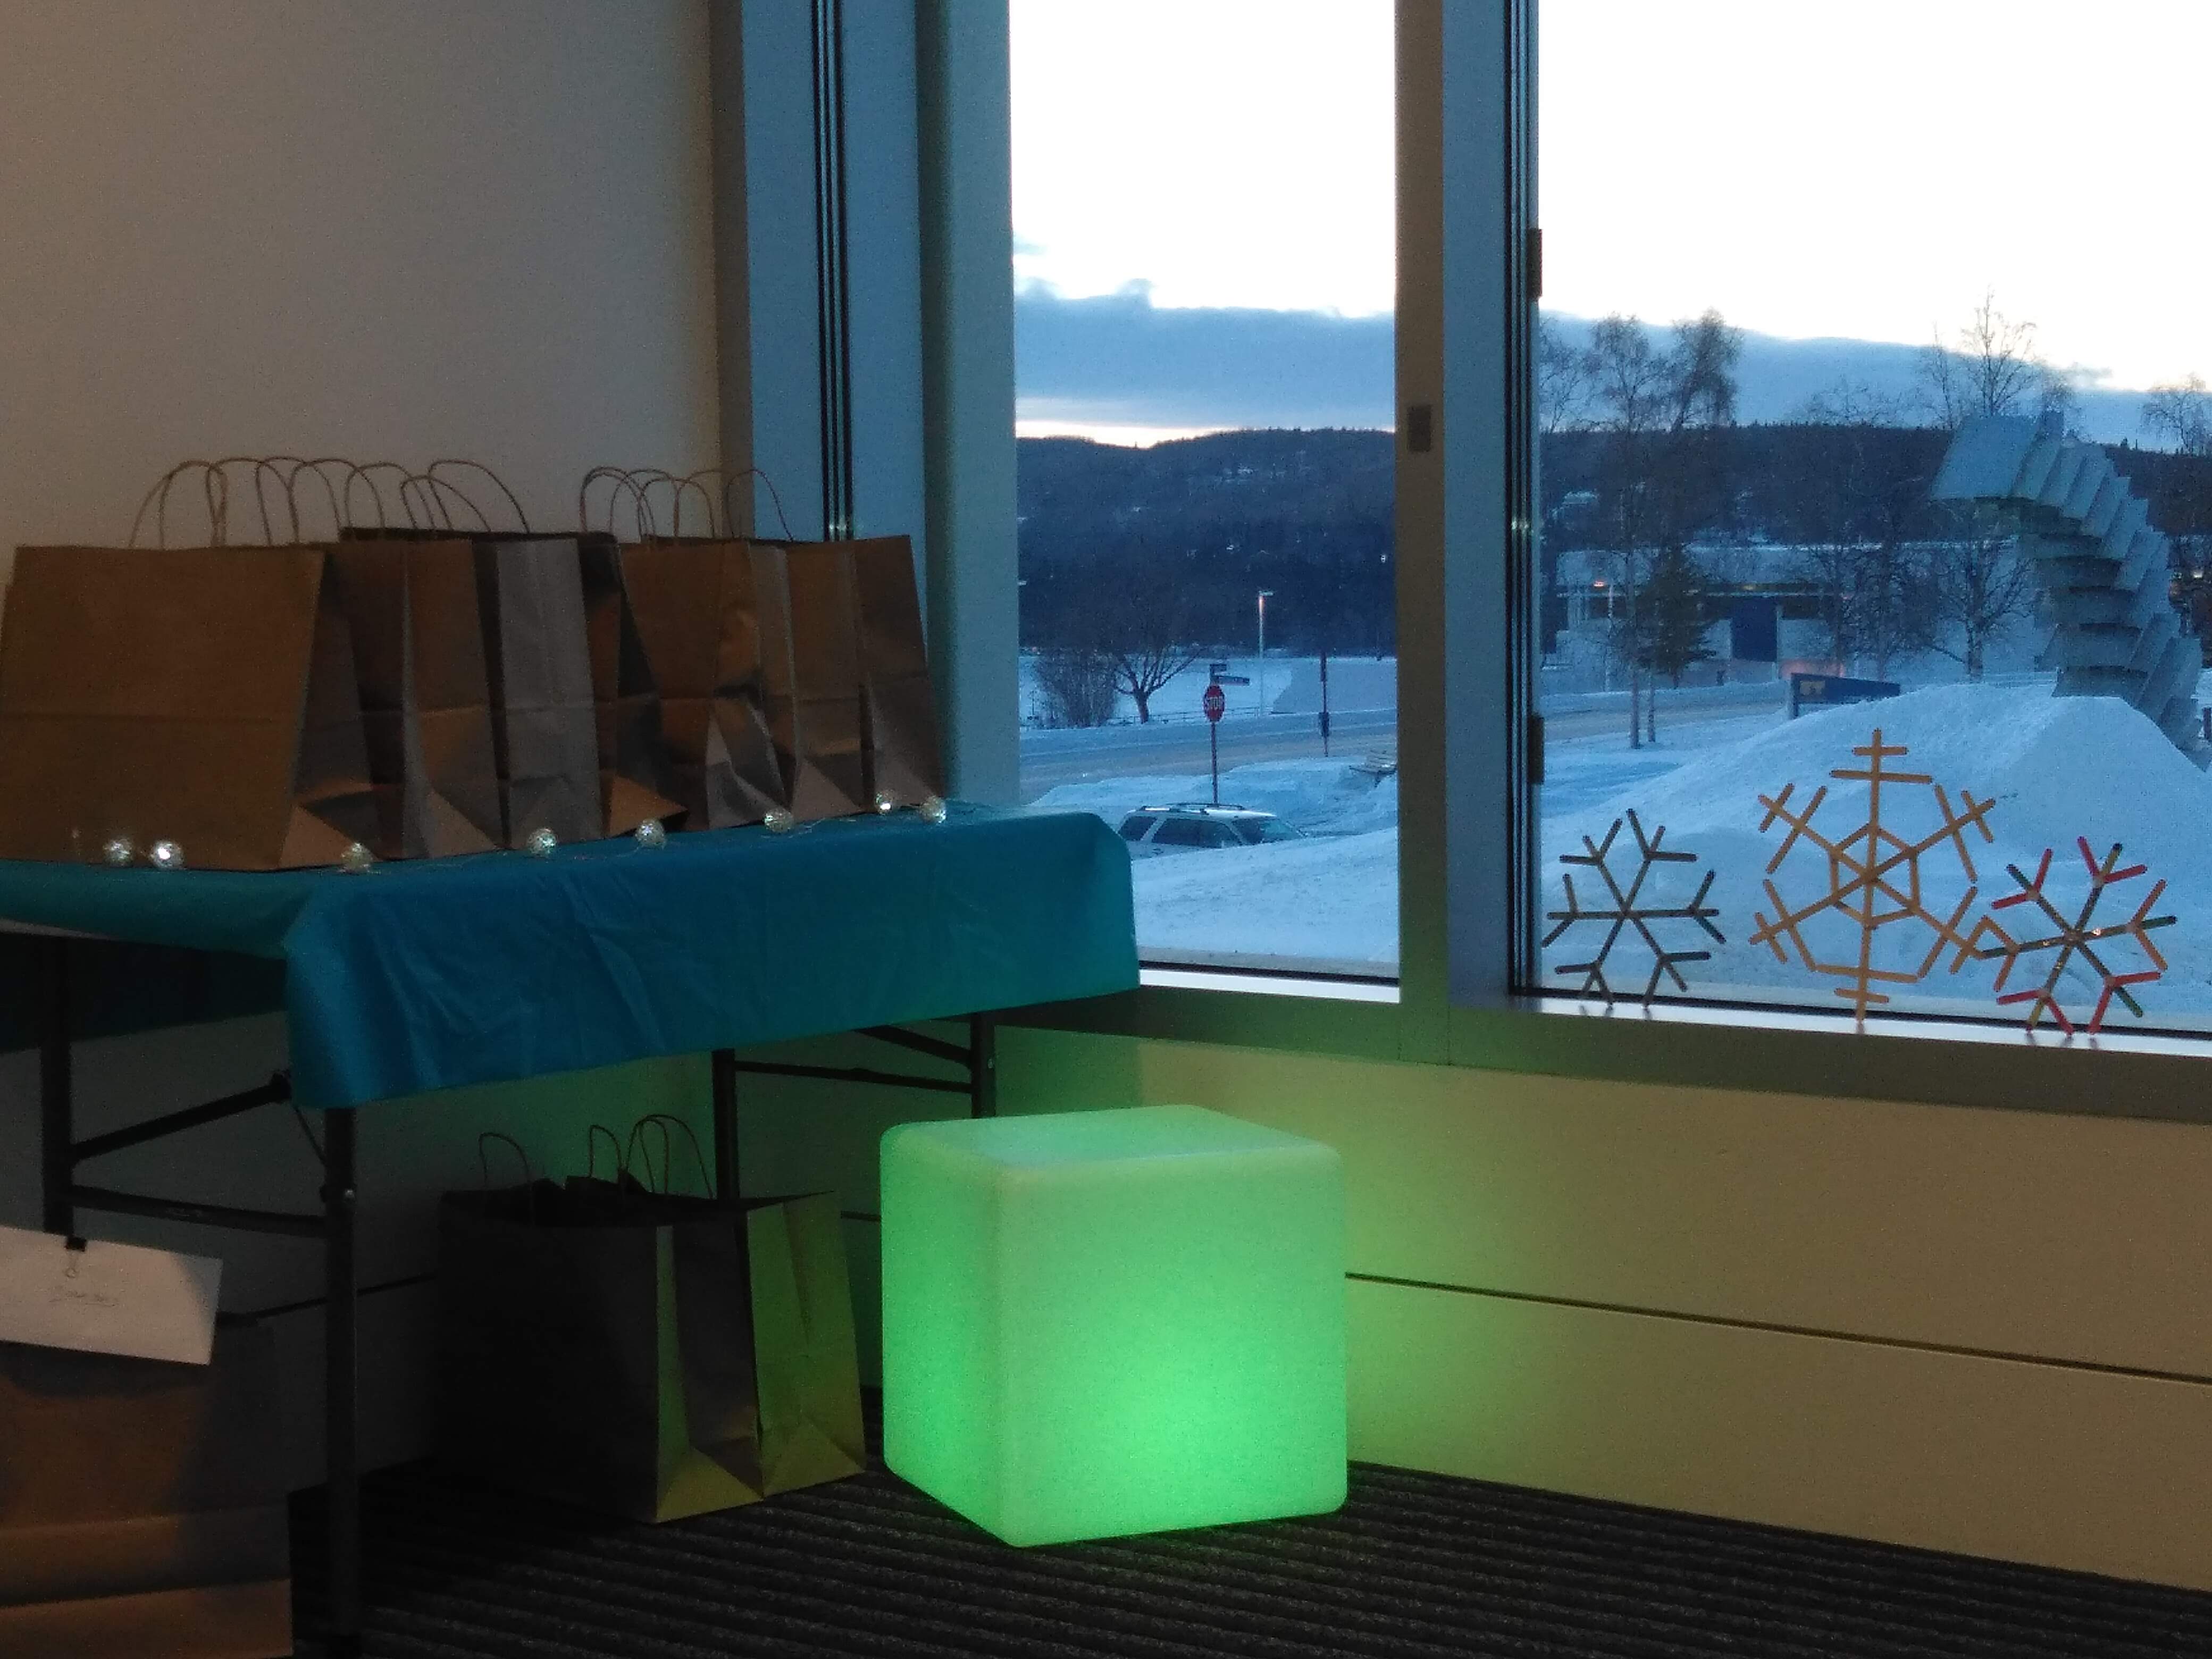 Winter Packets ready for distribution--brown bags on table in entryway, light box & snowflake decorations.